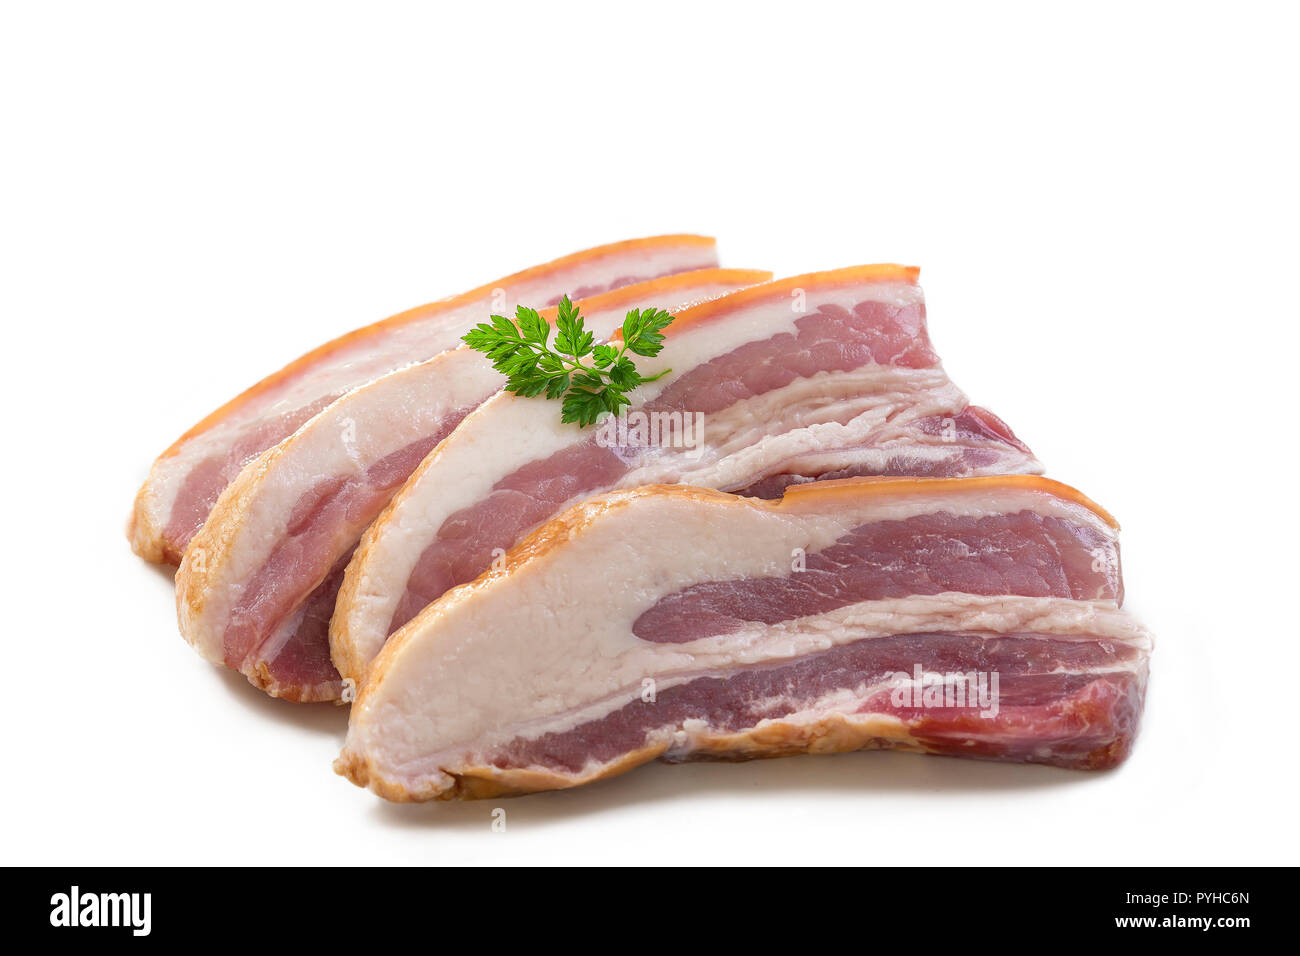 Smoked Sliced Bacon On White Background ready for cooking Stock Photo